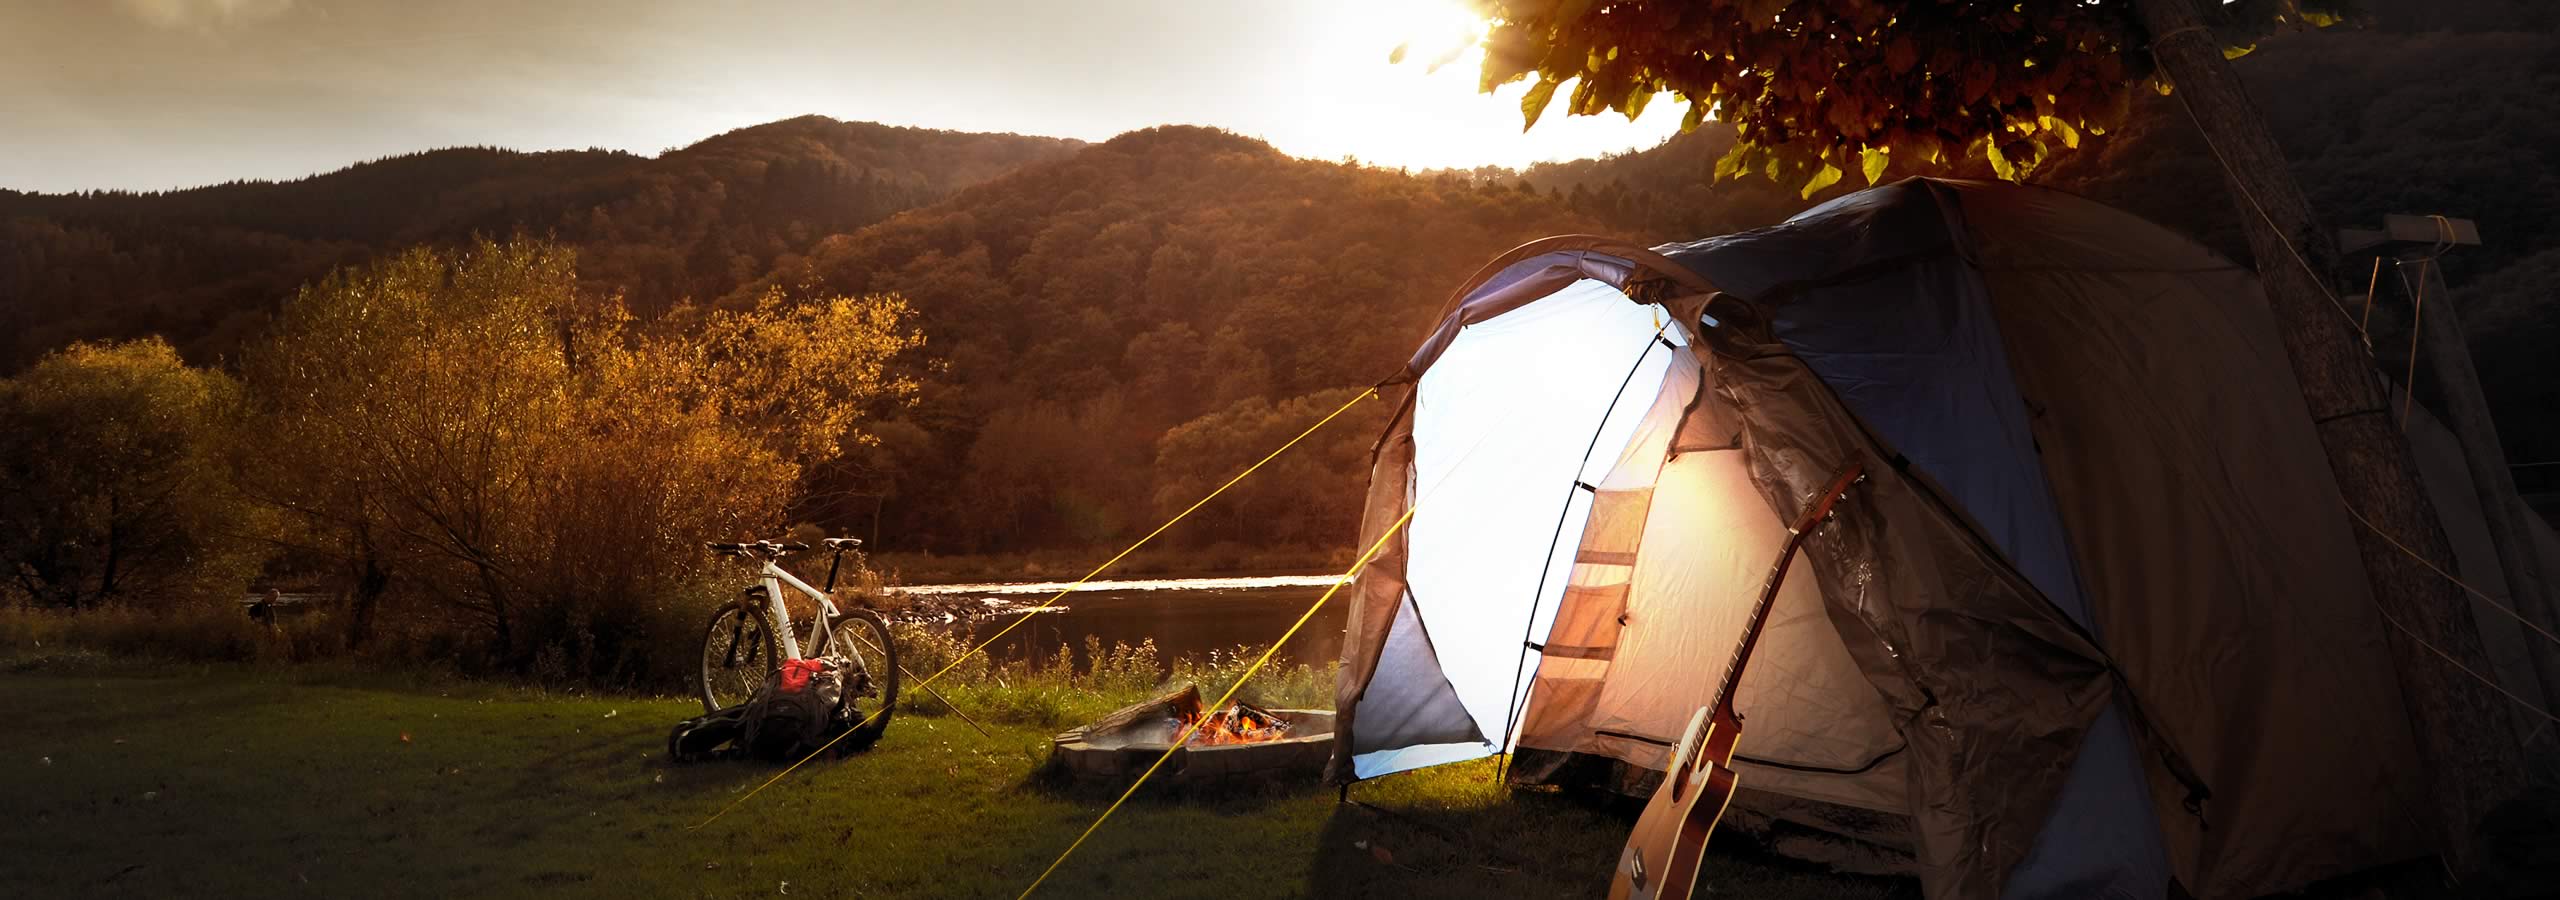 Camping ground "Zum Feuerberg": Camping at the Moselle - Pure experience